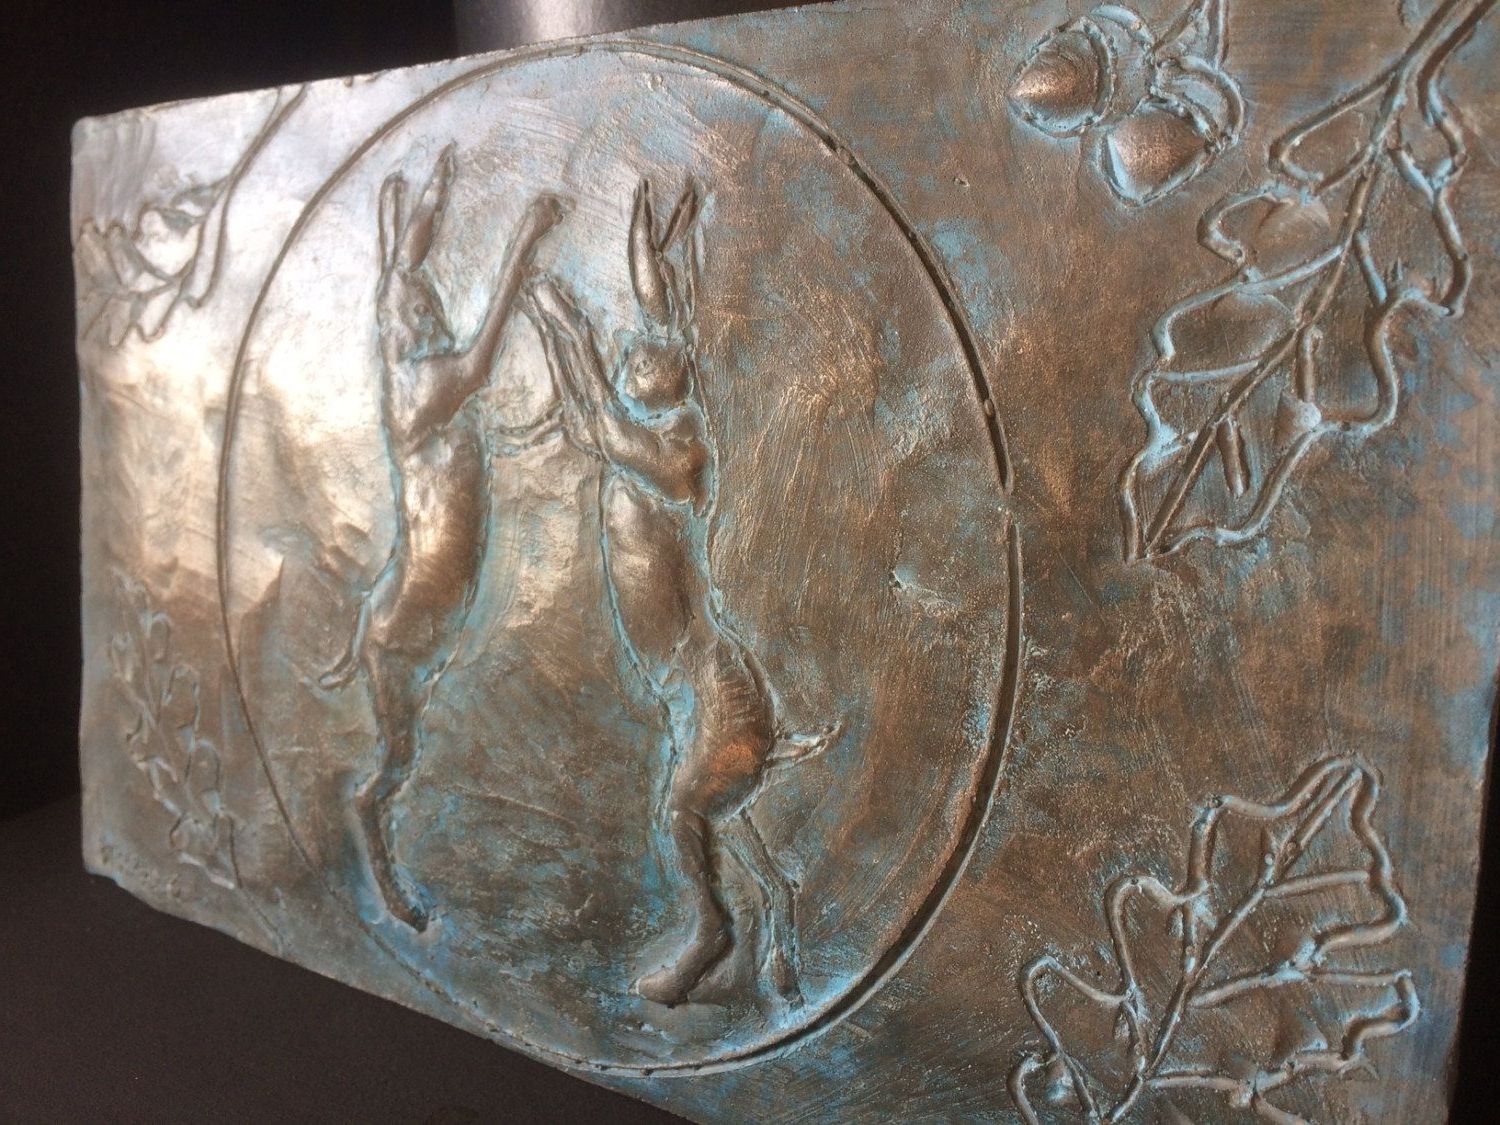 Preferred Boxing Hares Bronze Wall Art, Beautiful Artwork For The Home Or With Regard To Bronze Wall Art (View 12 of 15)